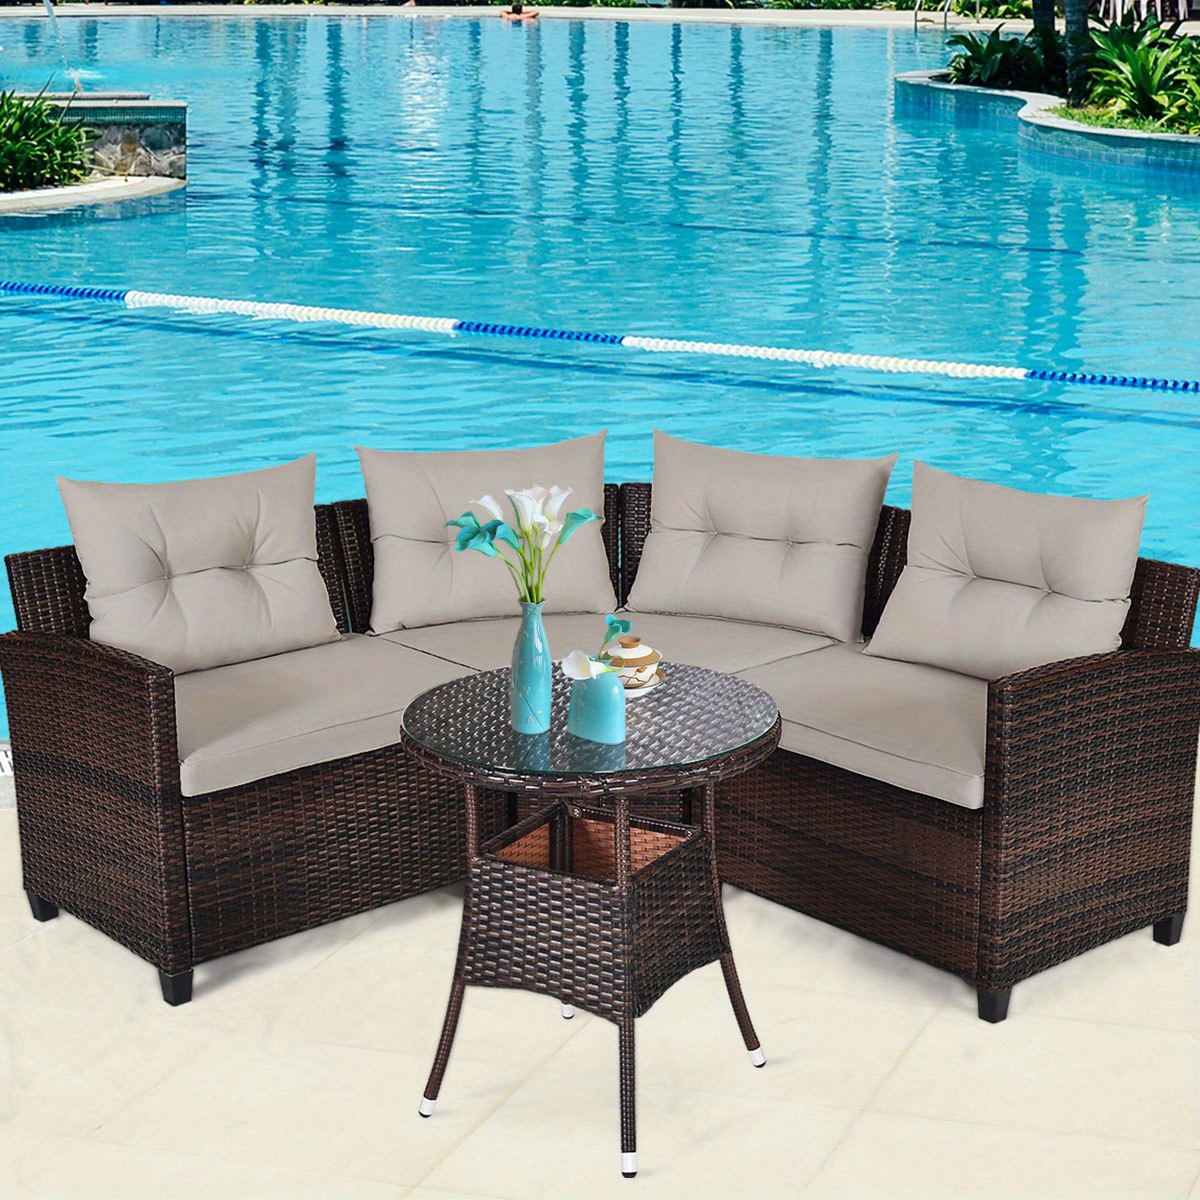 

Lifezeal 4pcs Outdoor Patio Rattan Furniture Set Cushioned Sofa Table Sectional